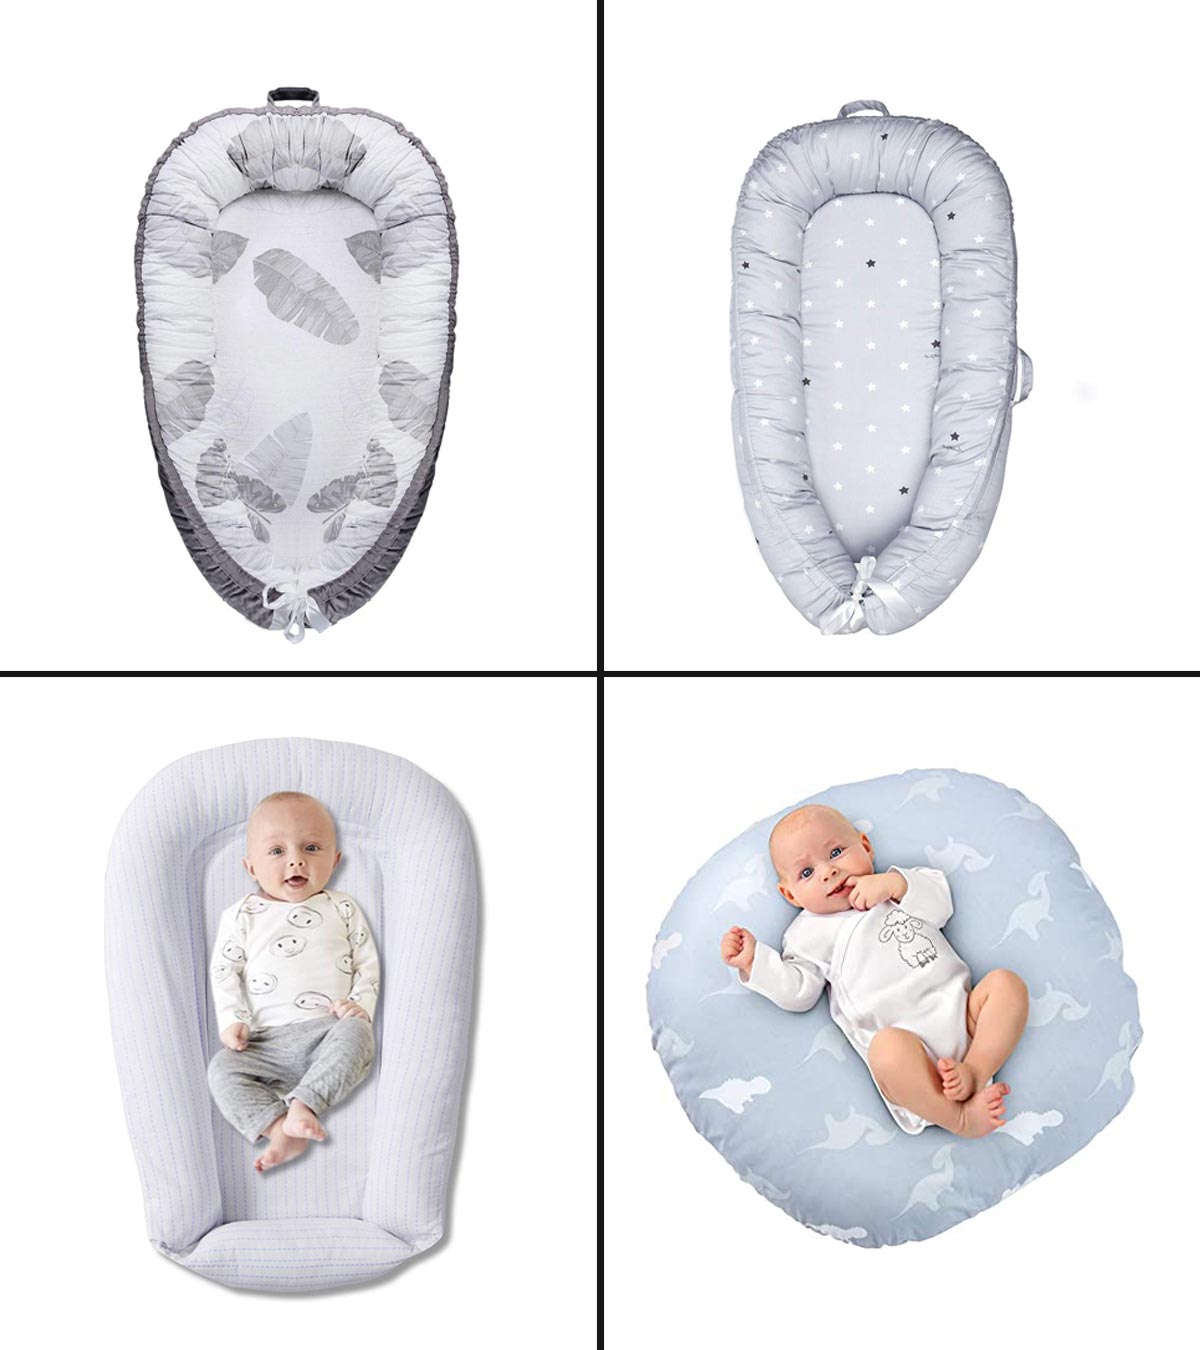 White with 2 Changeable Covers Multifunctional Machine Washable Breathable BABY-DOCK Newborn Lounger Baby Nest for Co-Sleeping Soft 3 Hanging Toys and Carry Bag Portable 